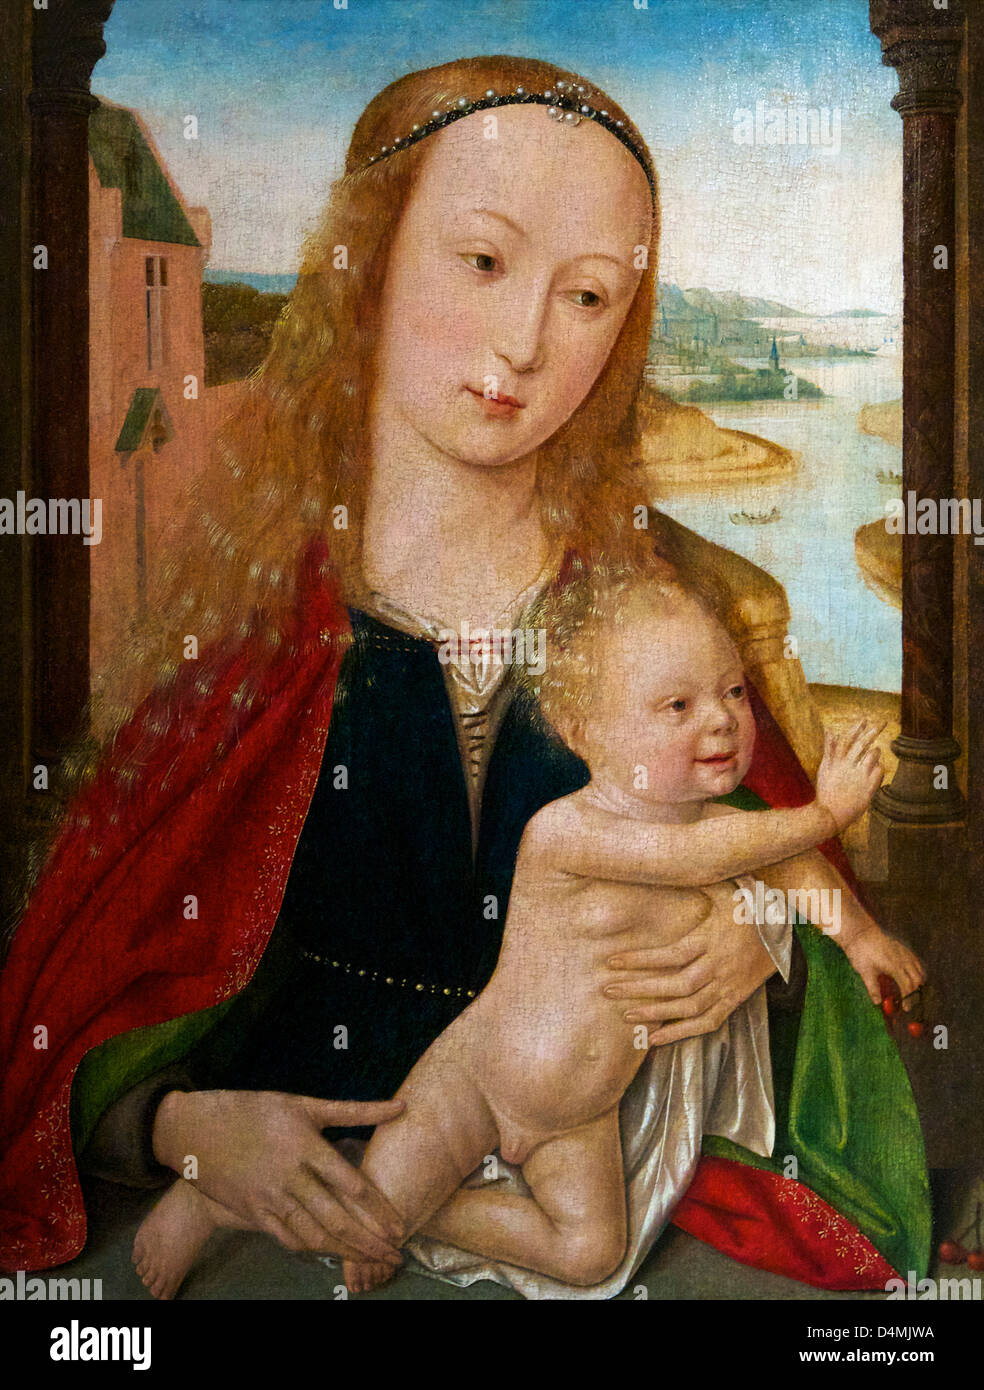 Virgin and Child and Donor, Master of Bruges,  circa 1495 Courtauld Institute of Art, Somerset House, London, England, UK, Unite Stock Photo